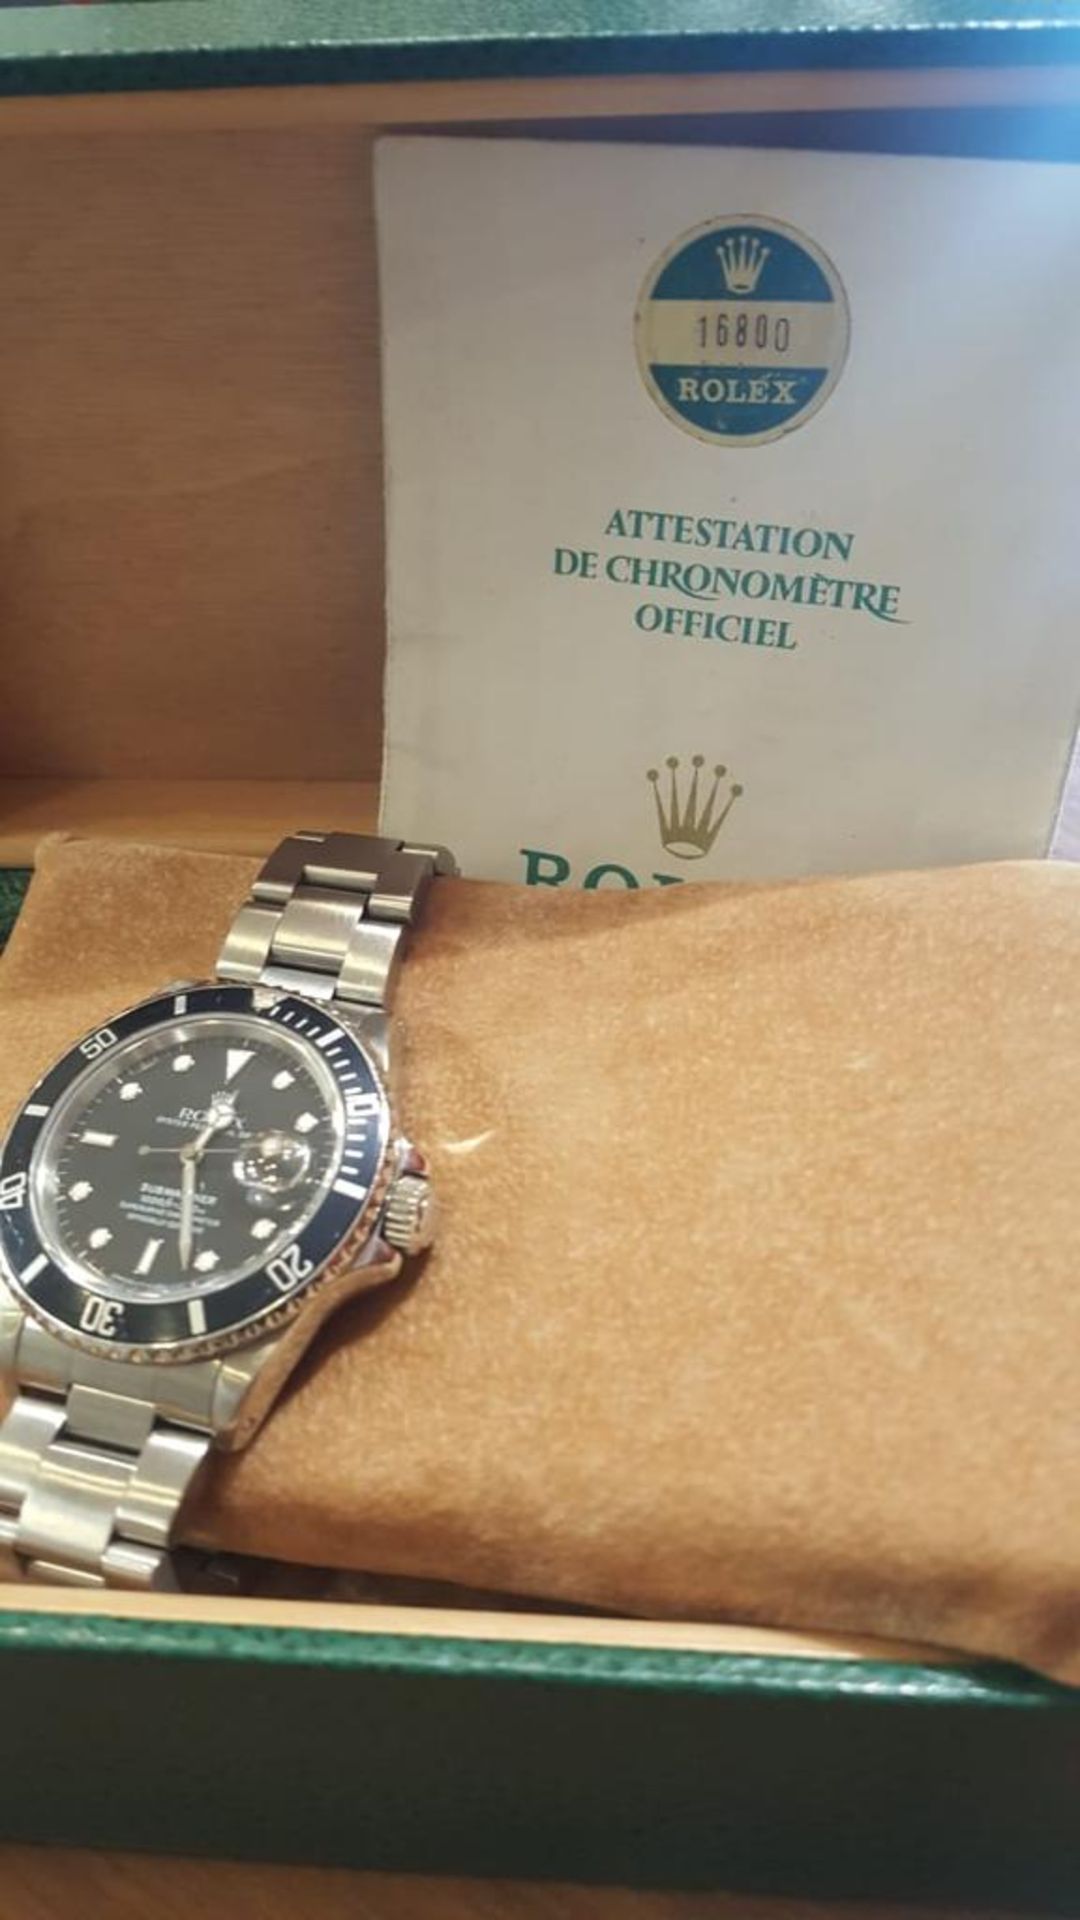 Brand: ROLEX Submariner Date model (watch) Reference number 16800 Automatic charge Material of the - Image 2 of 5